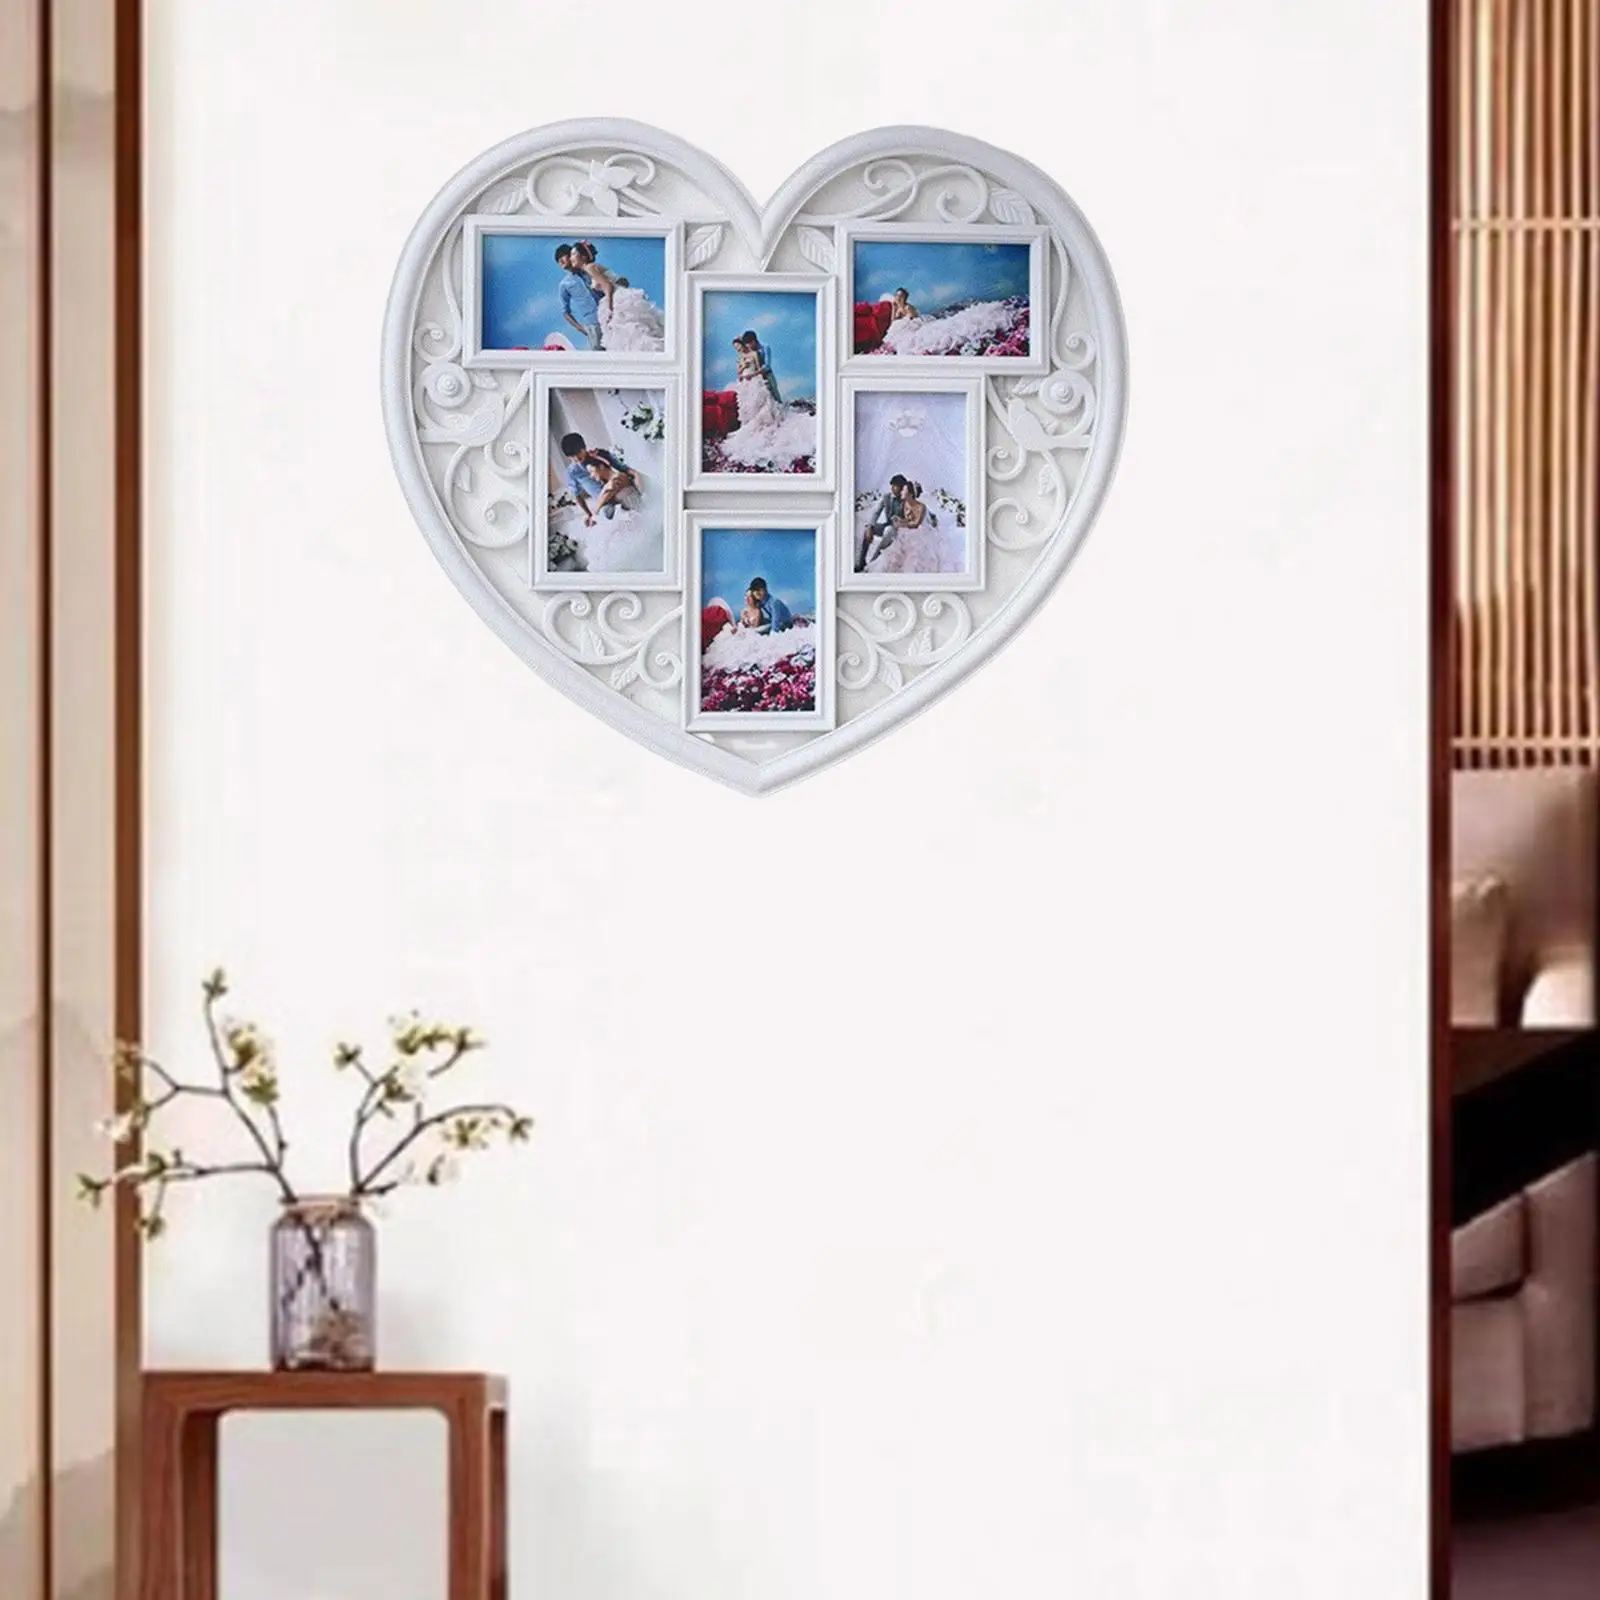 Heart Shaped Wall Decor Collage Picture Frame Decoration 6 Openings 4x6 White Family Photo Frame for Living Room Home Decor